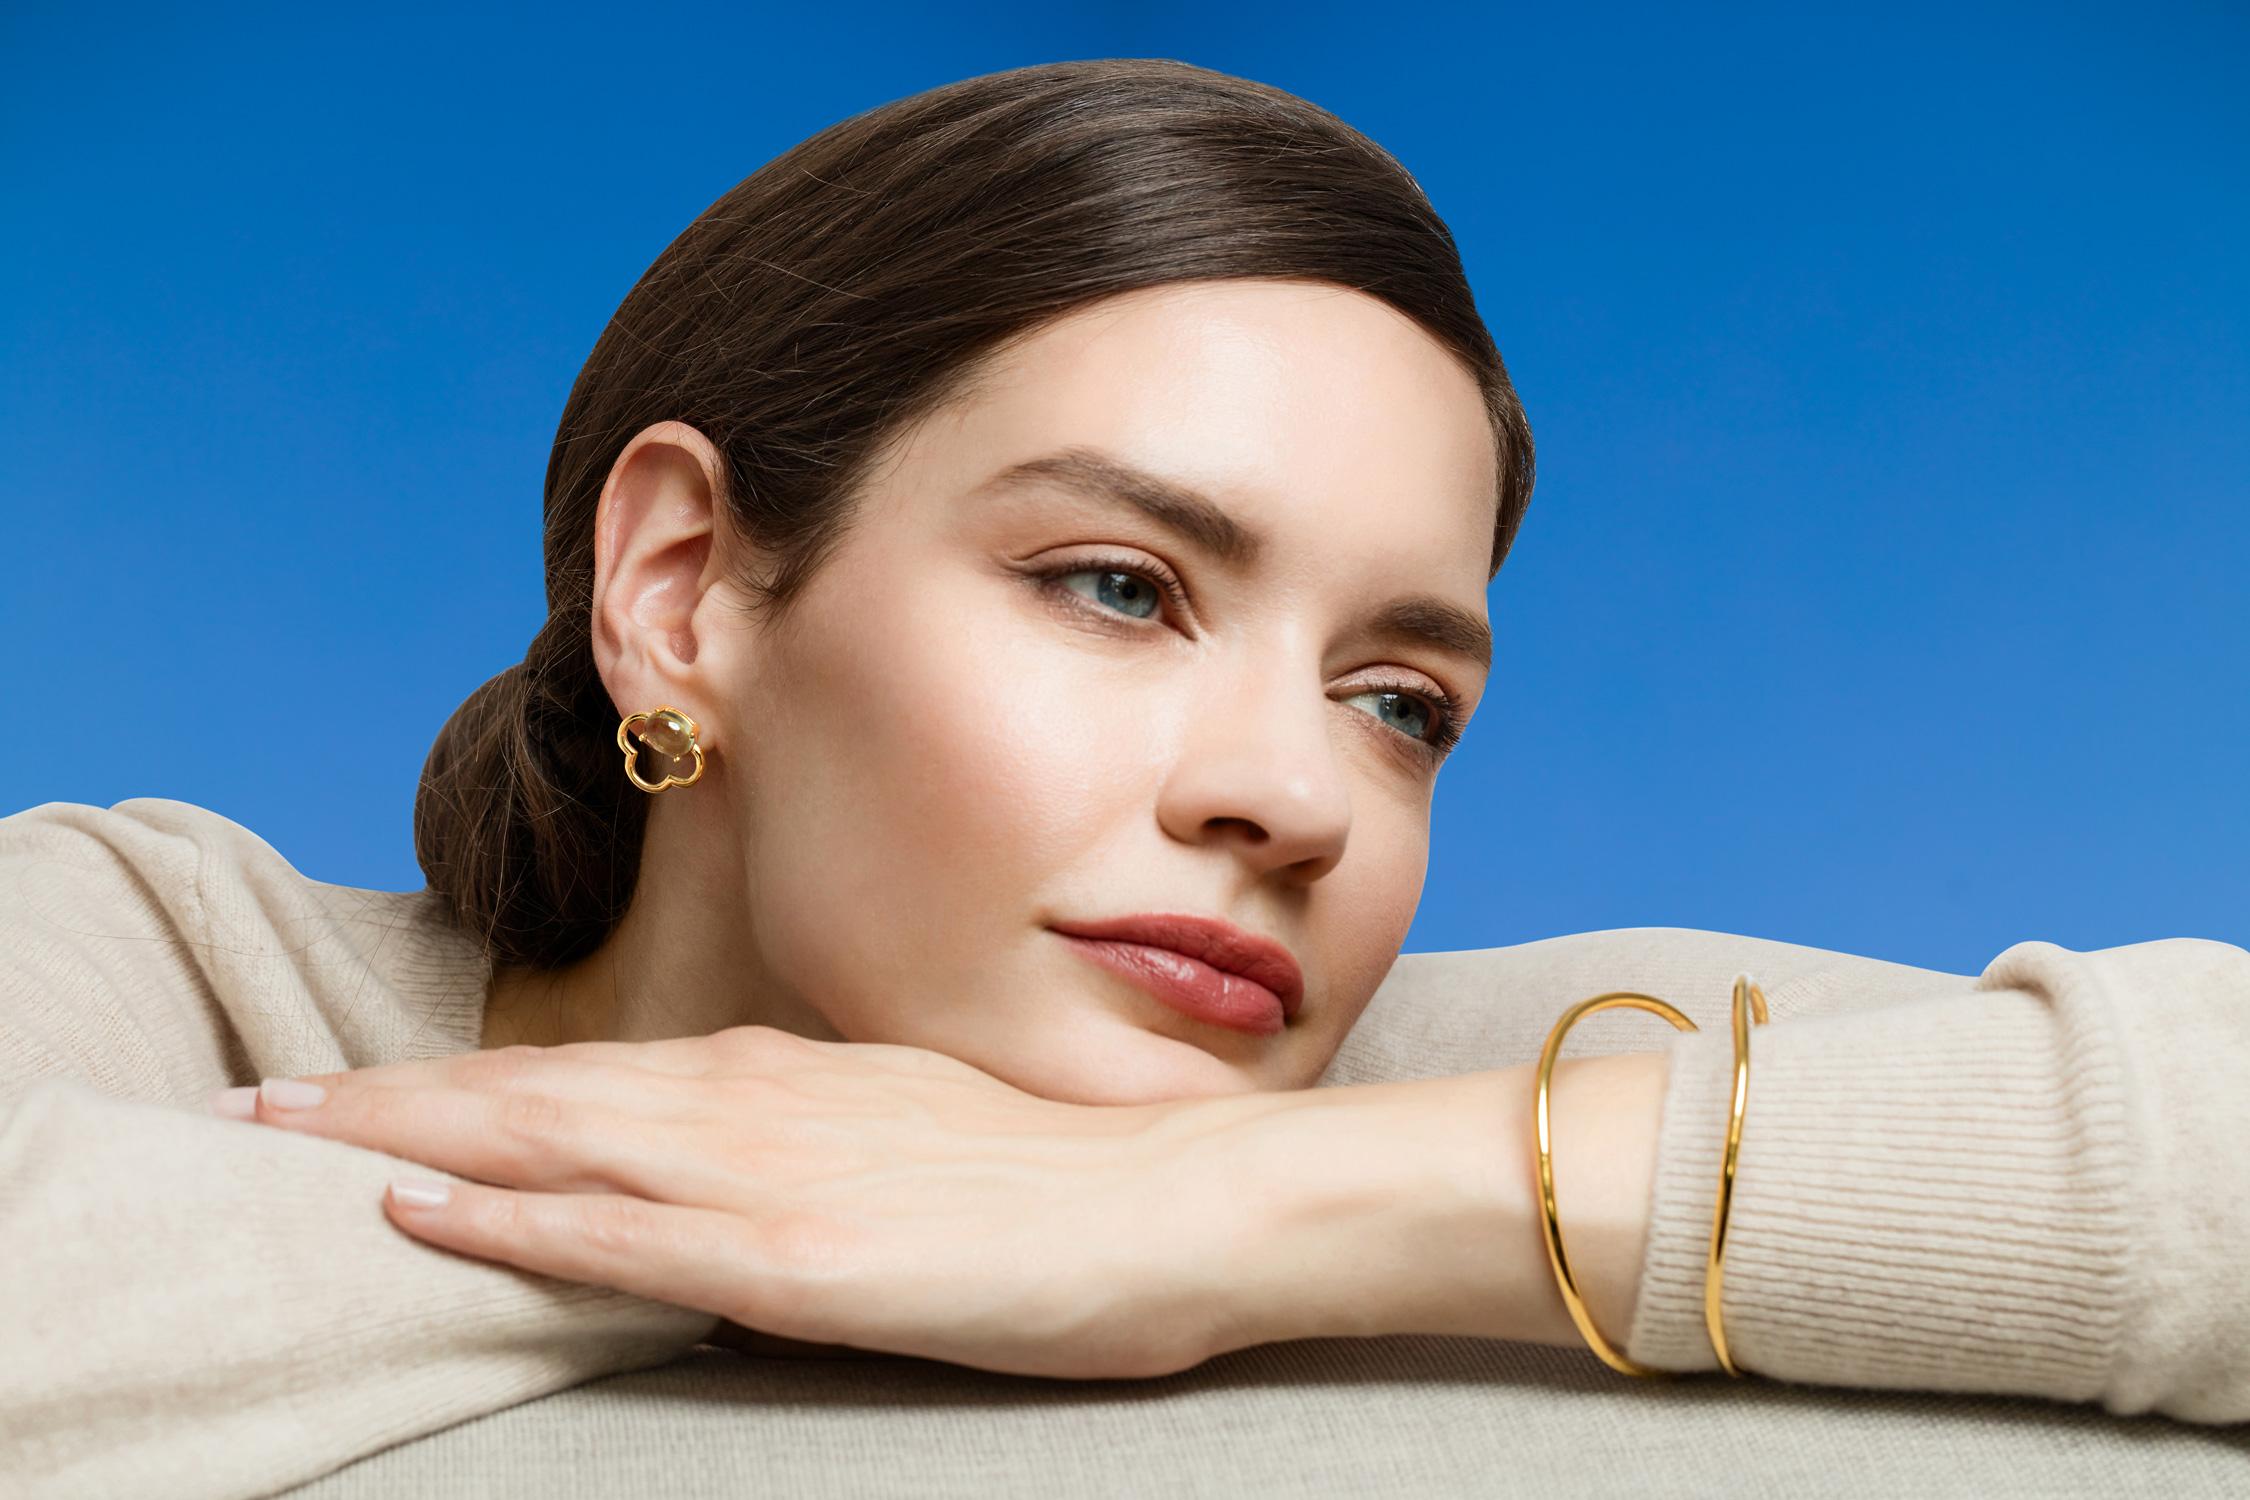 These brilliant bracelets come in two finishes - Rhodium Plated Sterling Silver and 18 karat Yellow Gold Vermeil. They come in two sizes: Small (65mm diameter) and Med/Large (70mm diameter). They are so stylish and emit cool sophistication.